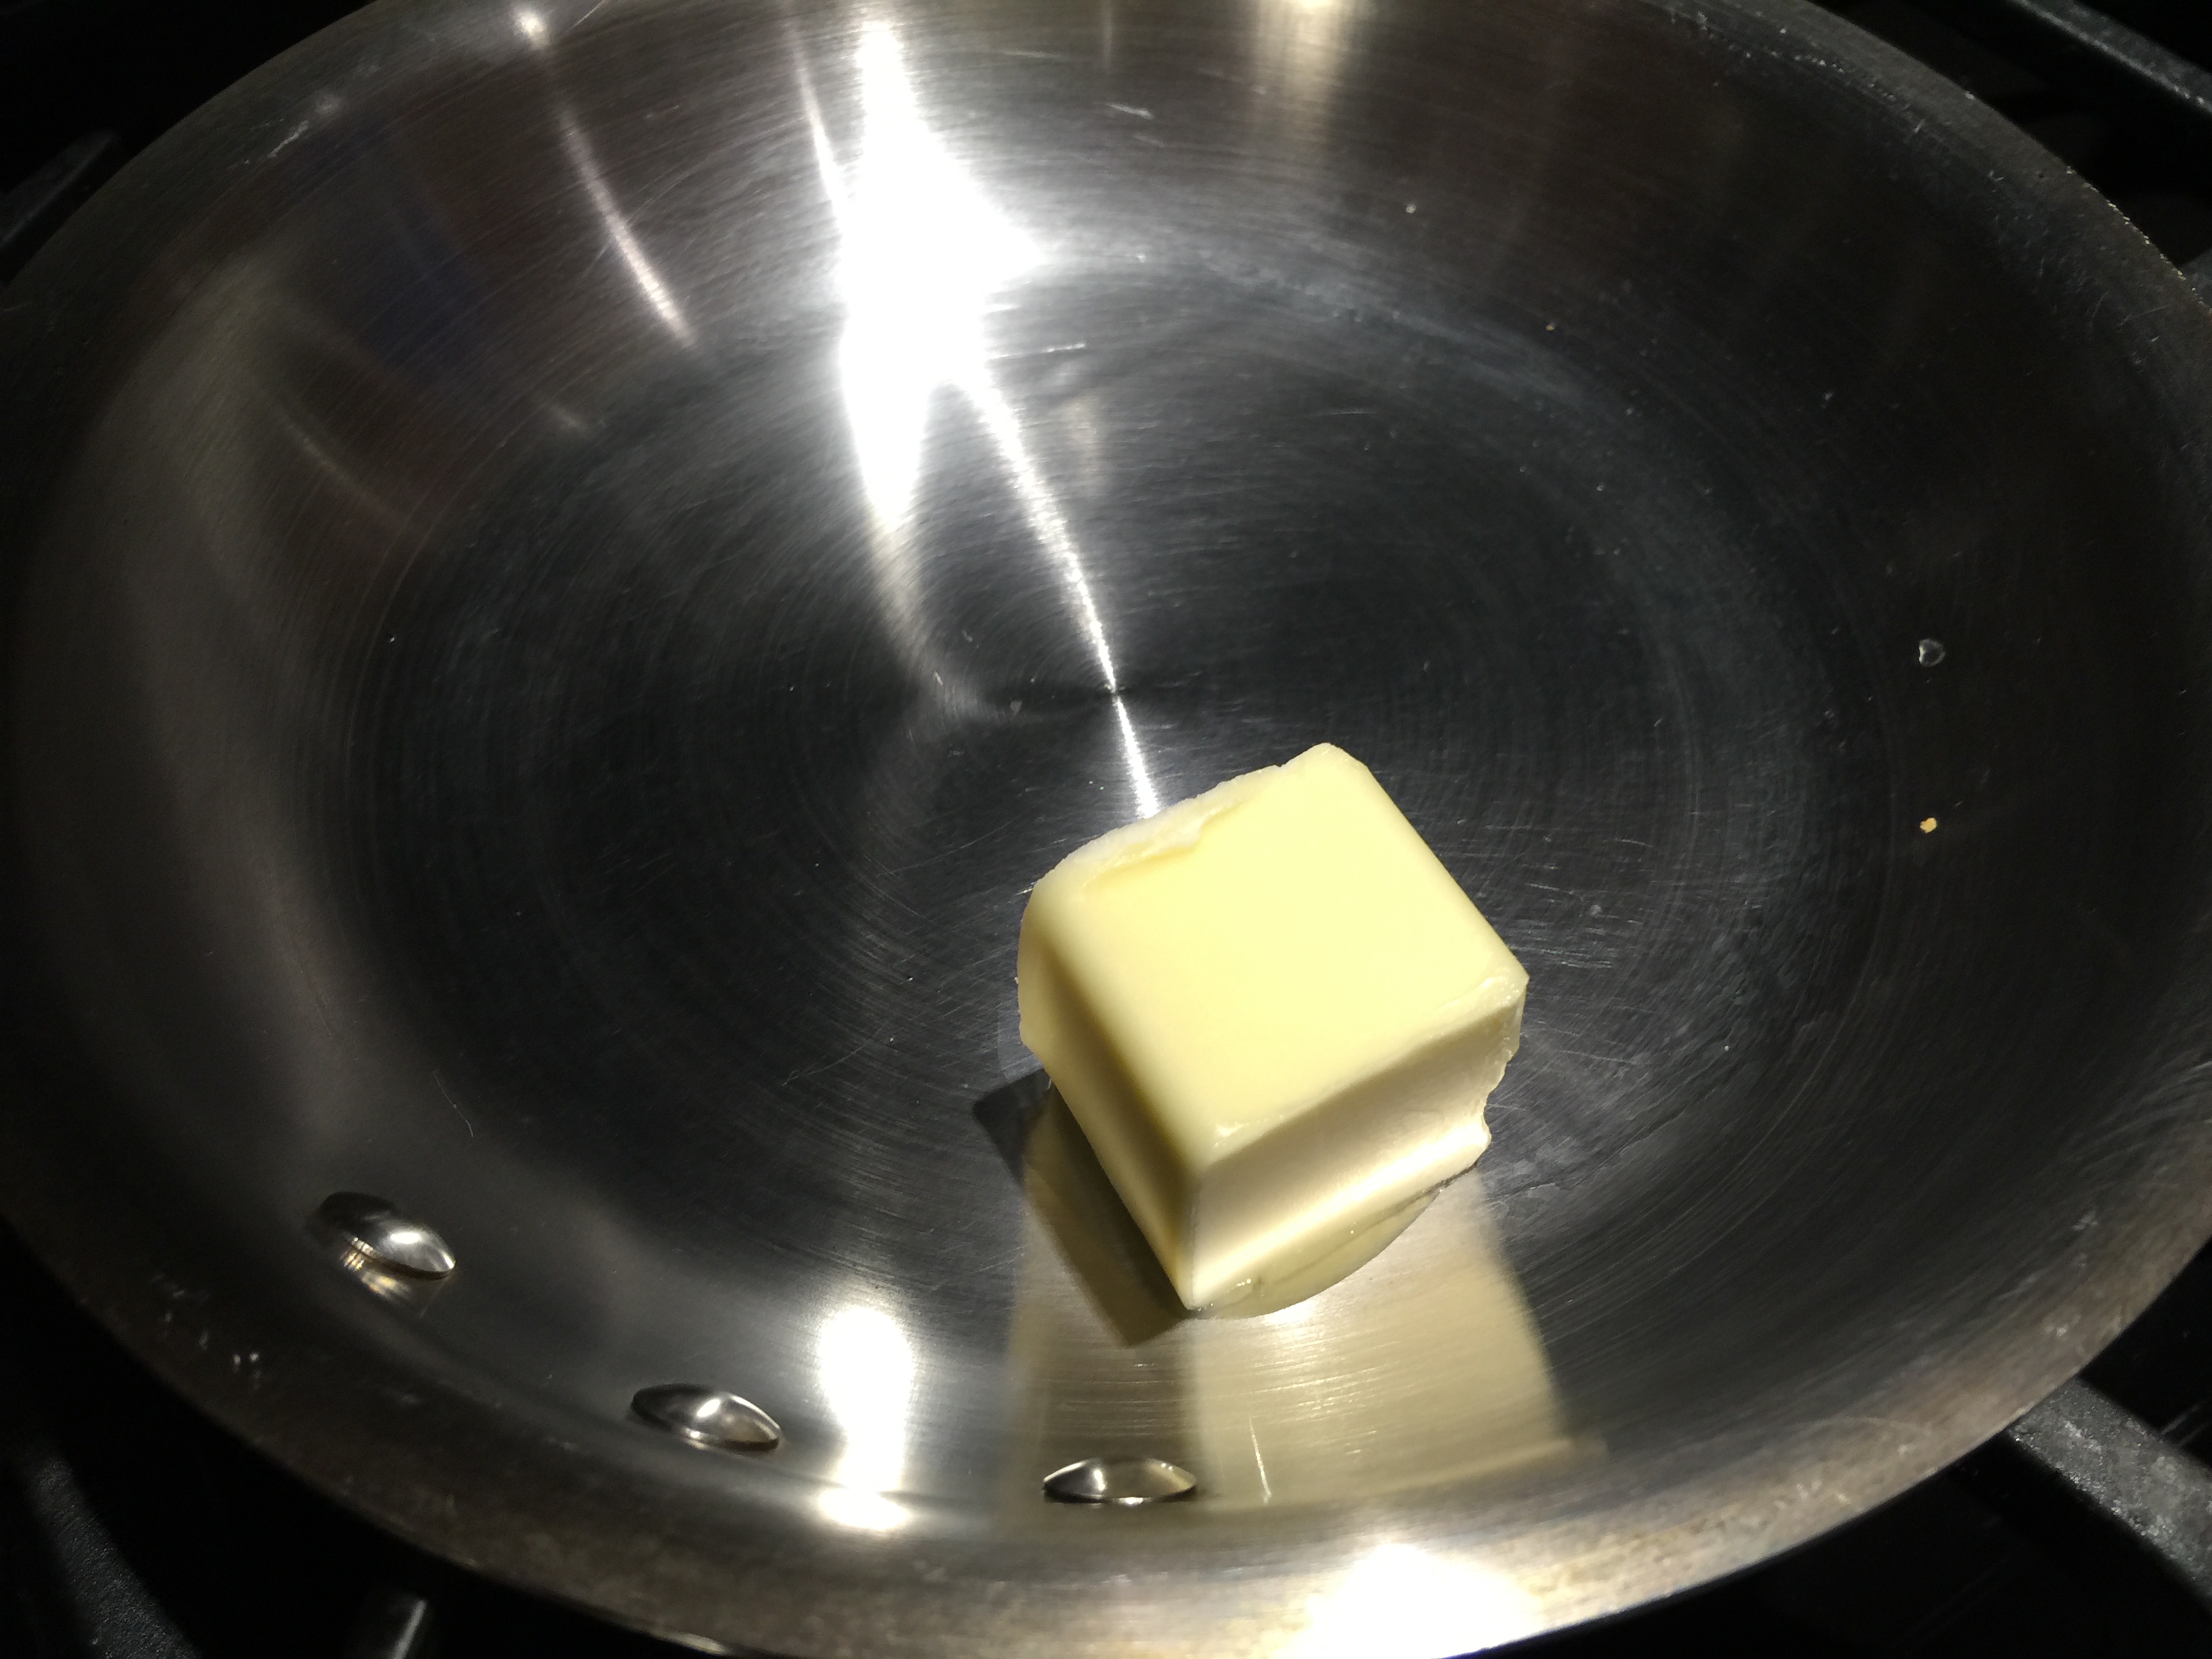 Melt Two Tablespoons of Butter for Cinnamon Sugar Croutons